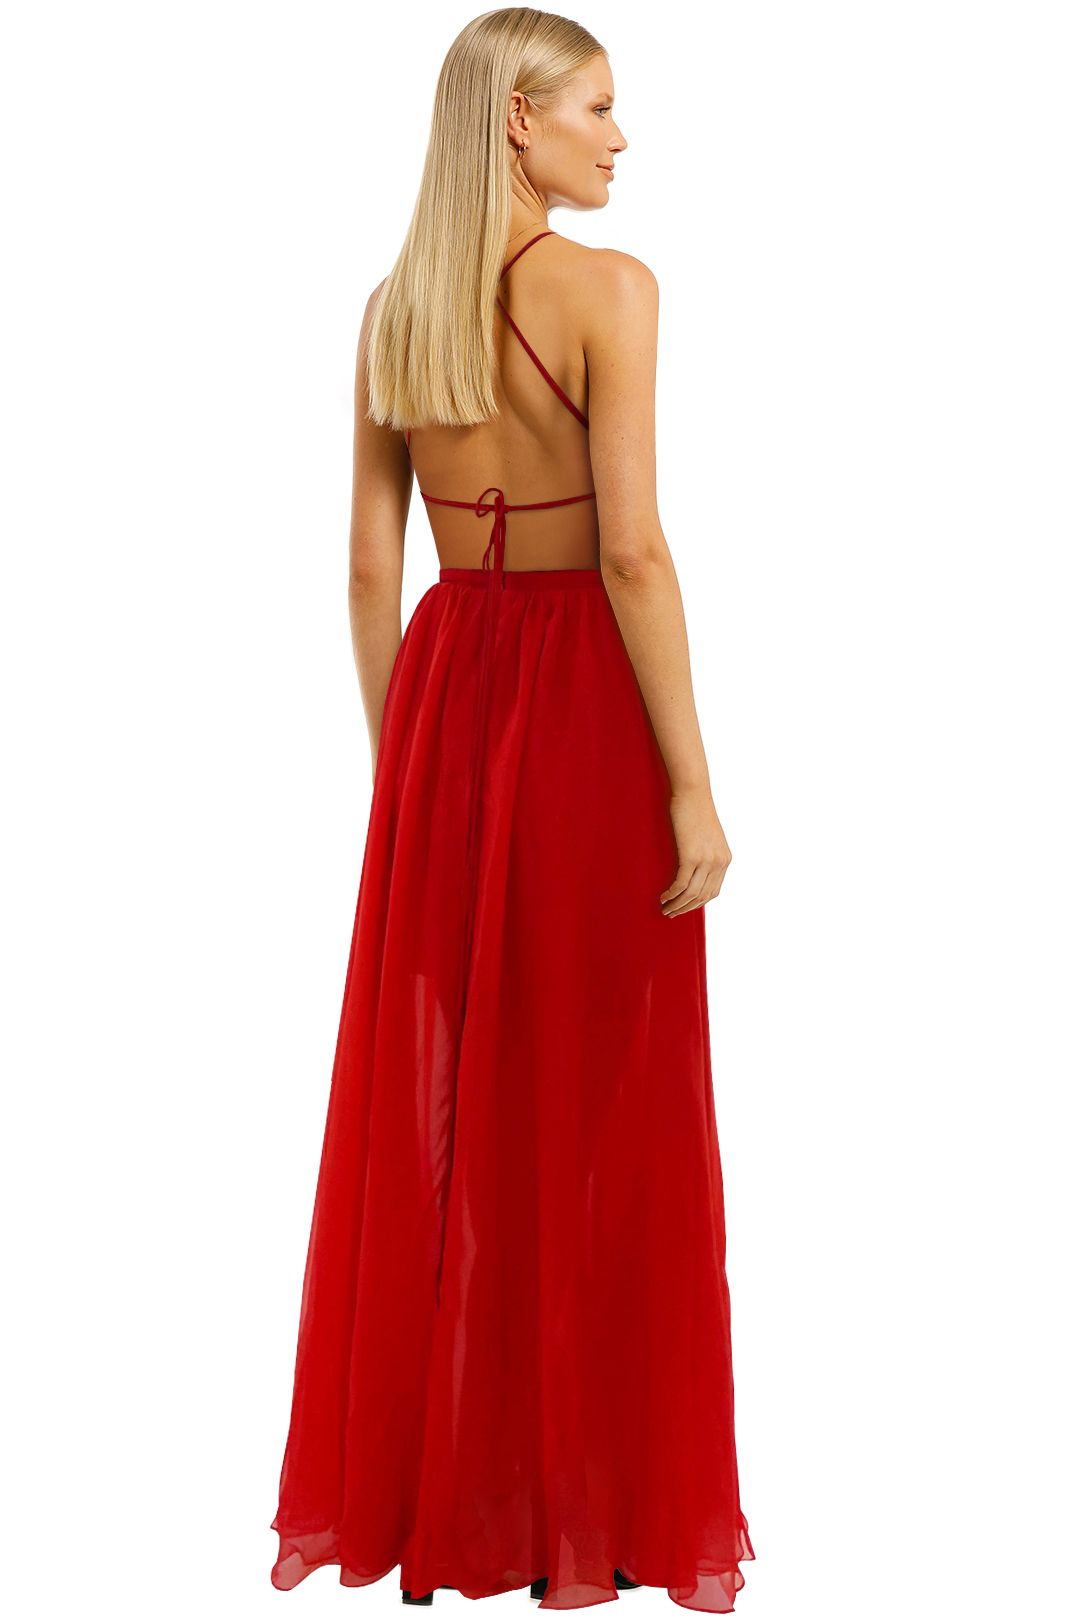 Fame-and-Partners-Mildred-Dress-Red-Maxi-Dress-Back